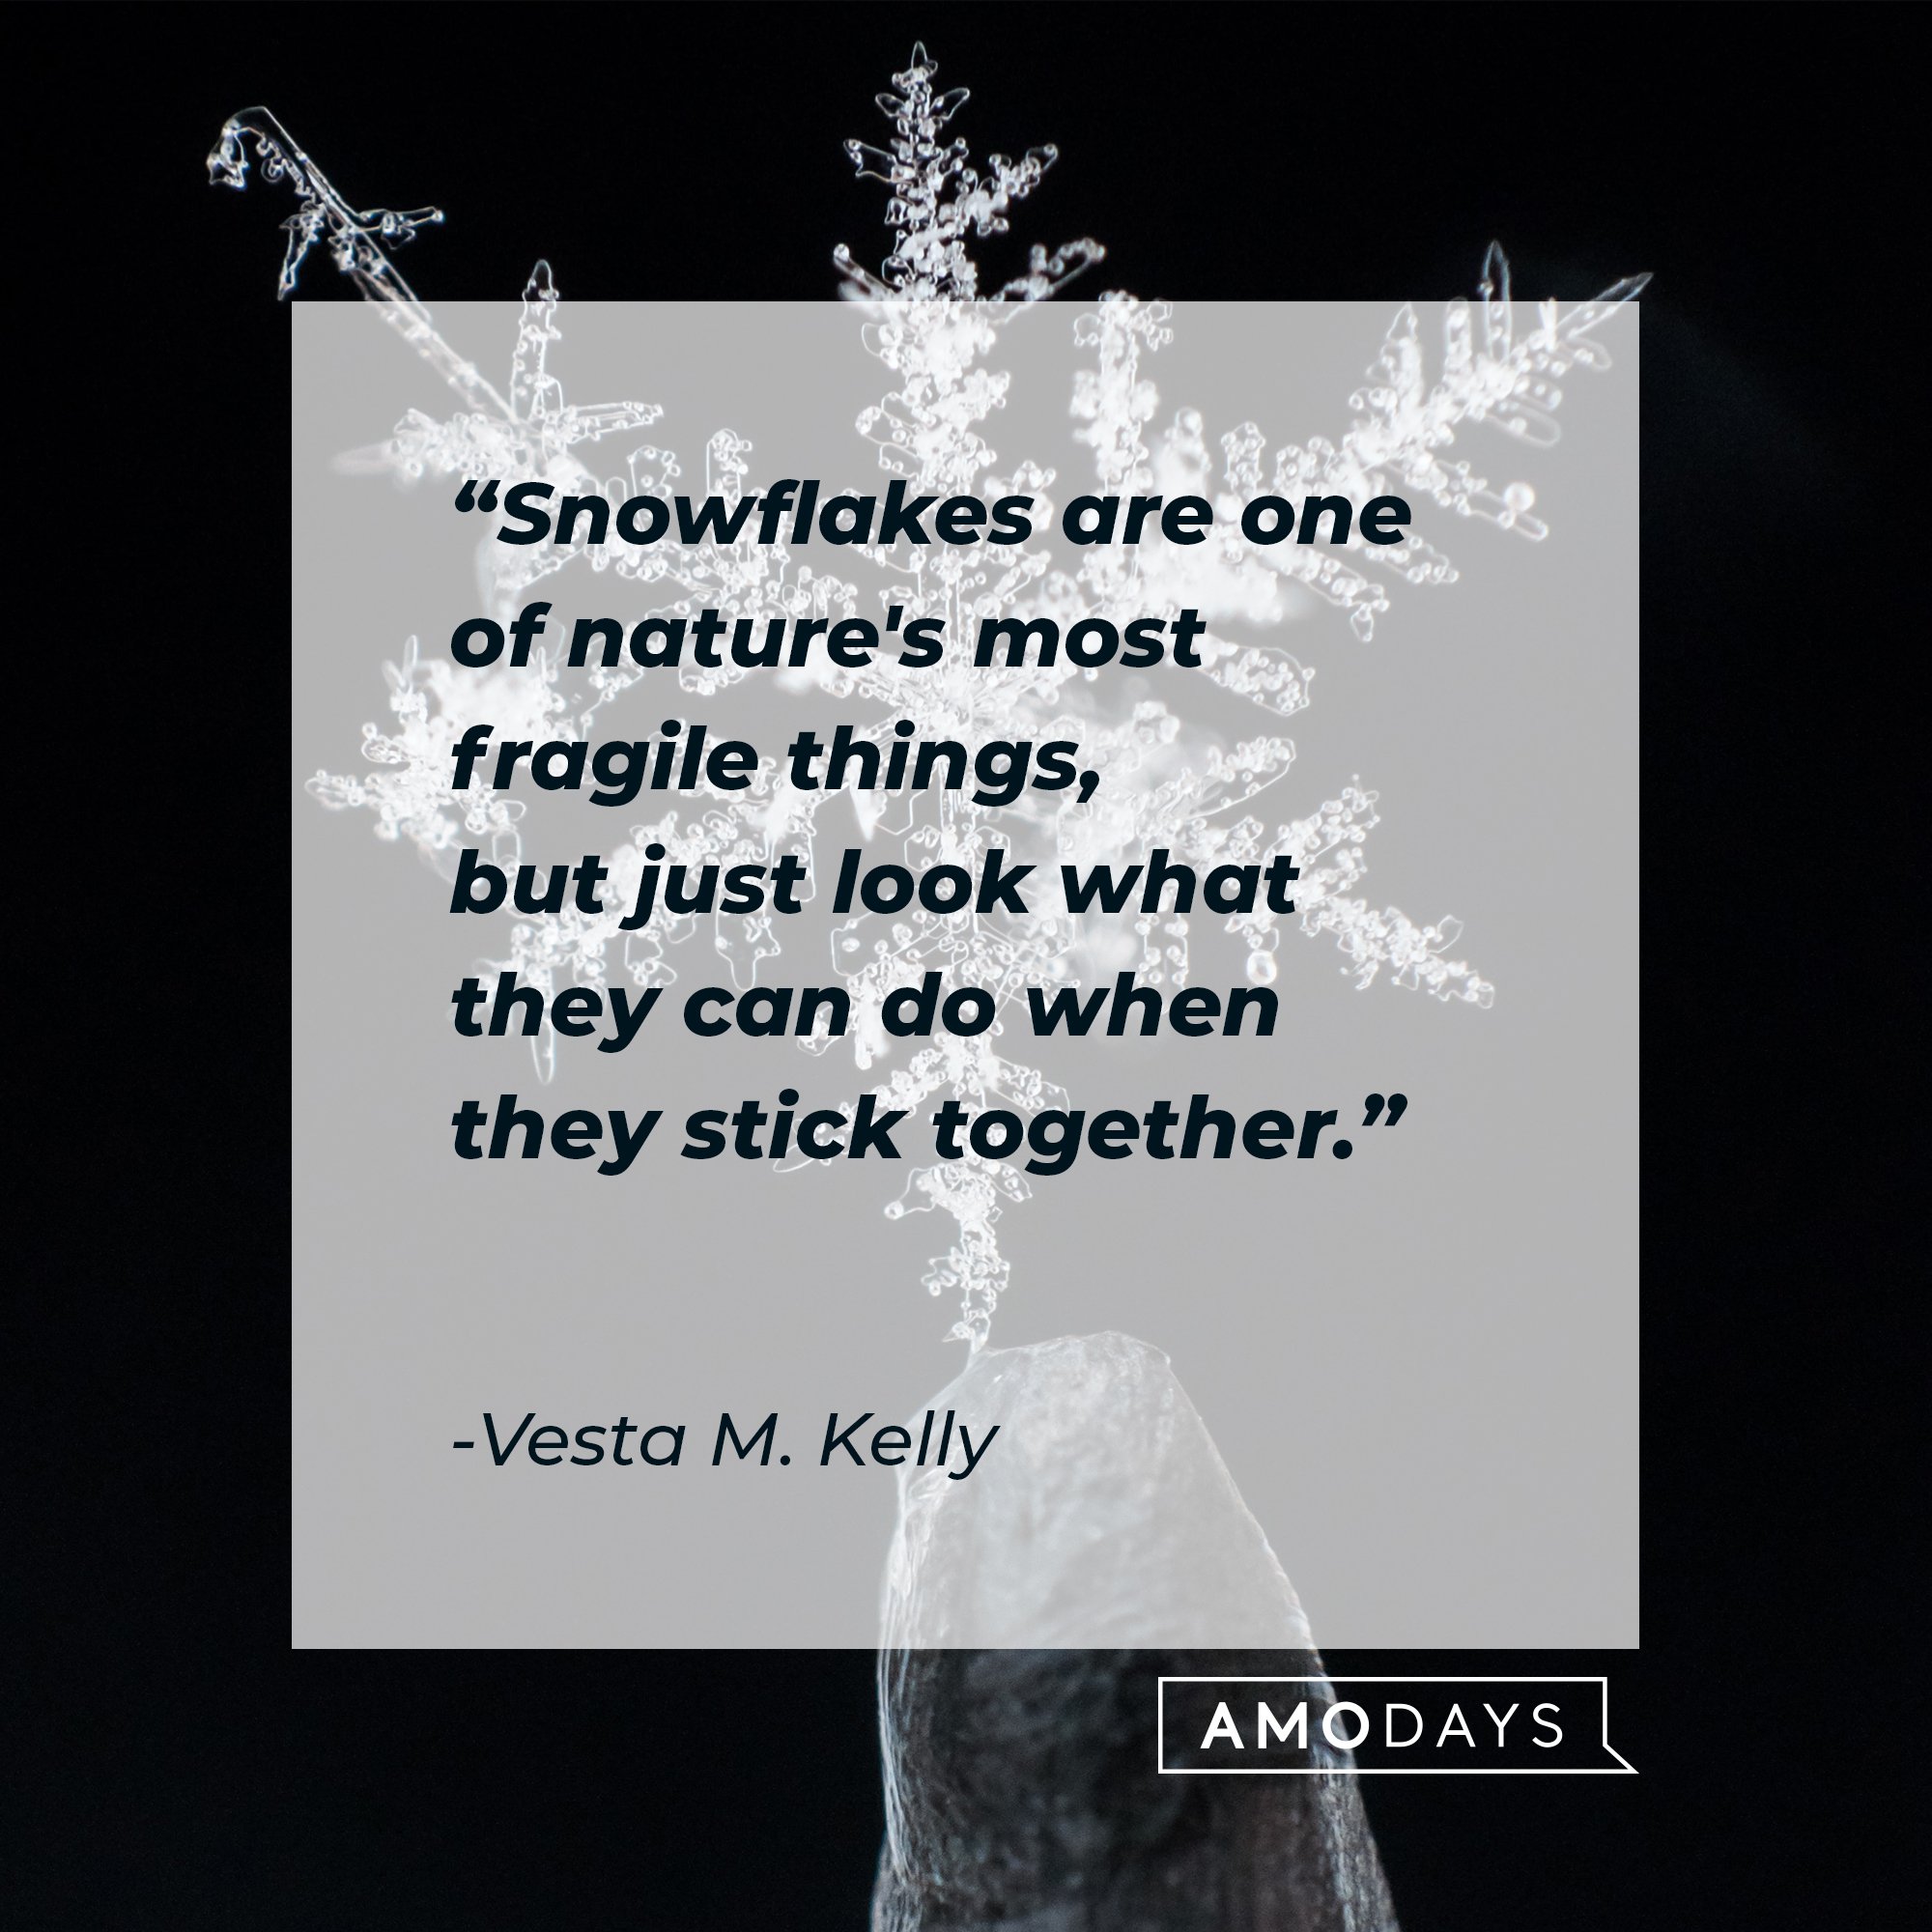  Vesta M. Kelly’s quote: "Snowflakes are one of nature's most fragile things, but just look what they can do when they stick together." | Image: AmoDays